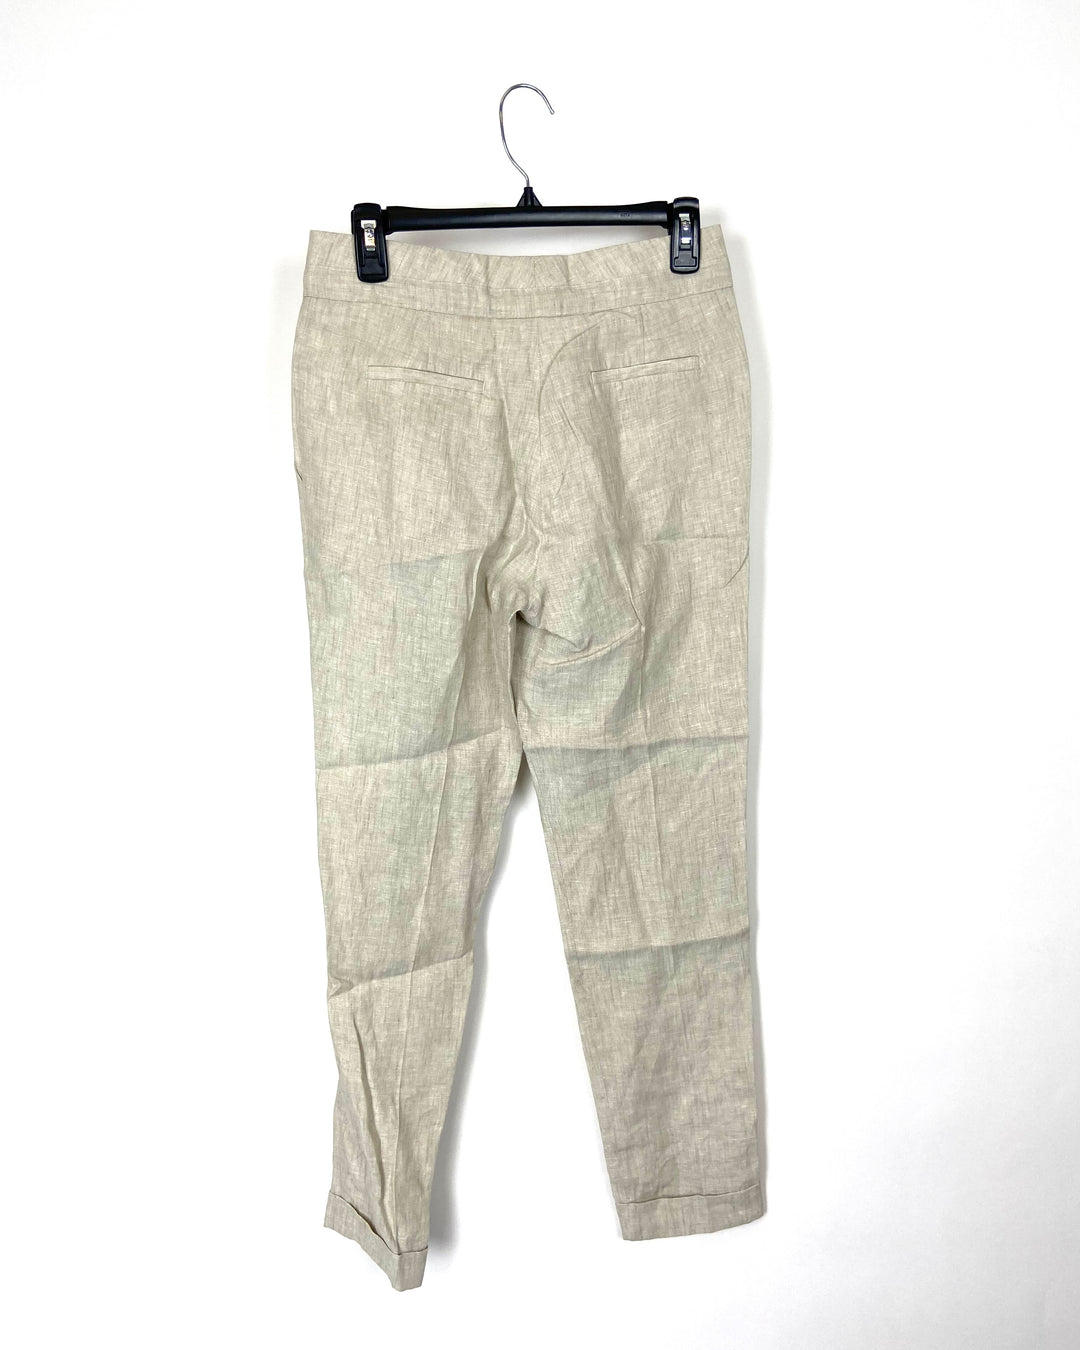 Beige Linen Pants - Extra Small